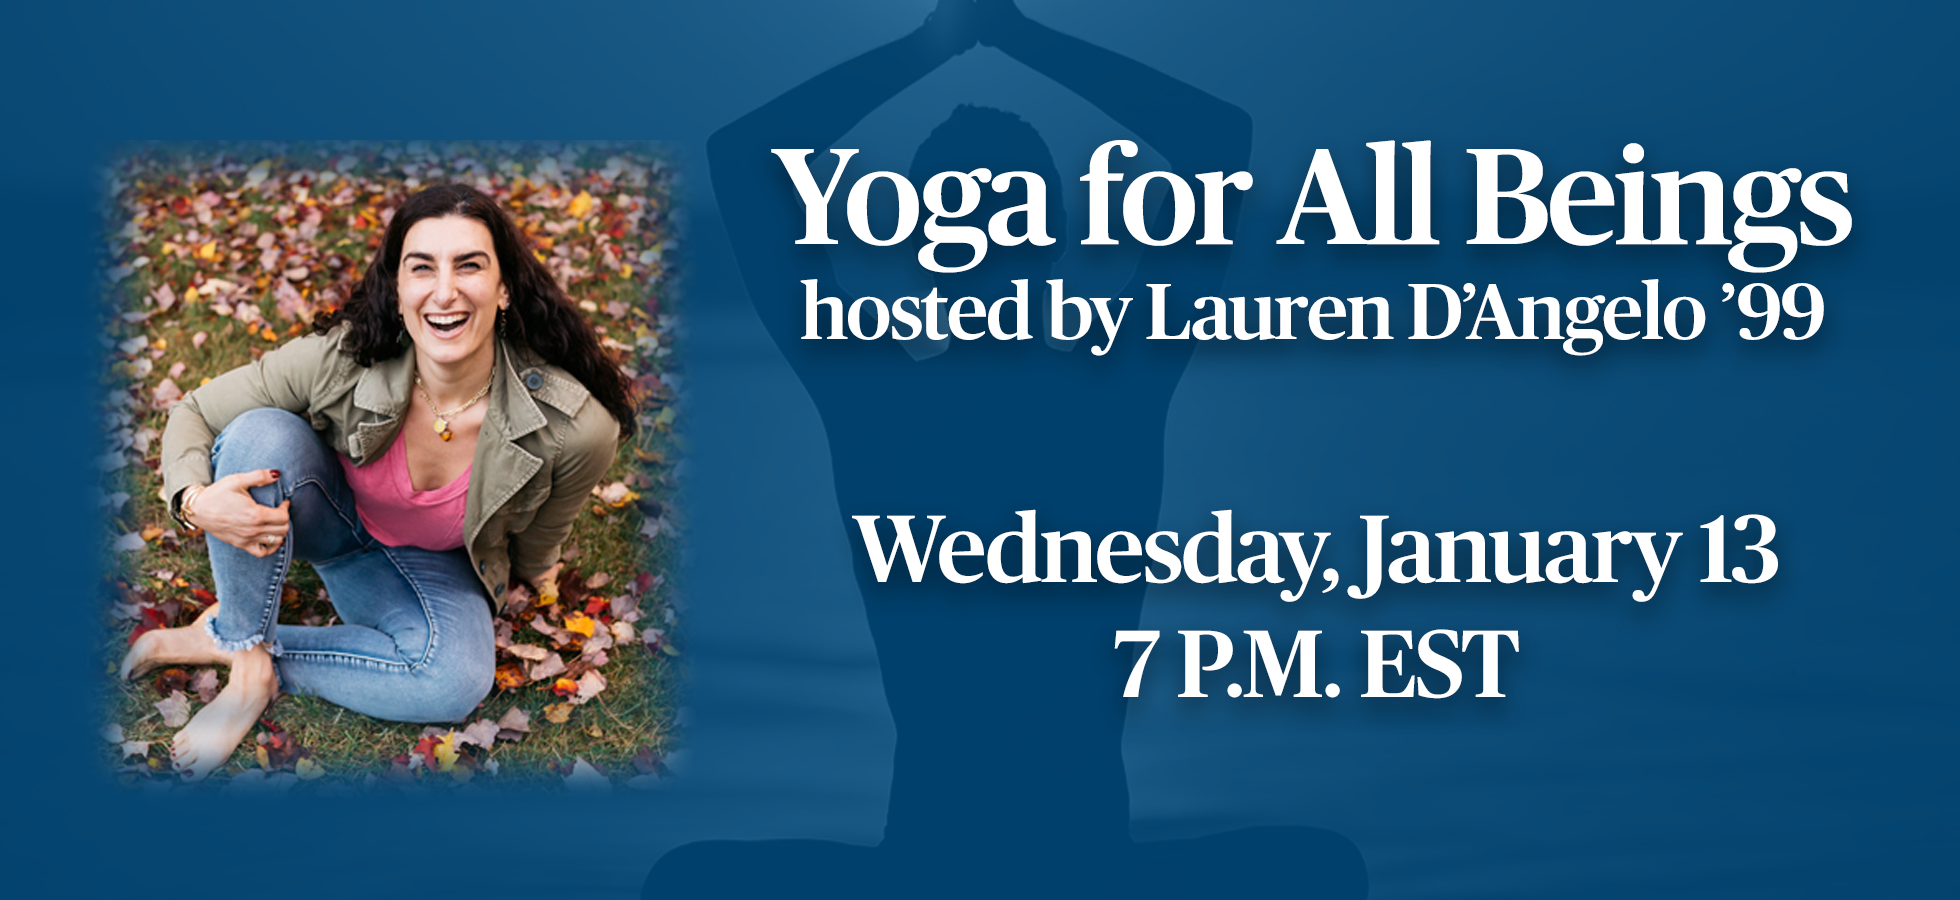 A graphic featuring an Assumption University graduate to promote Yoga for All Beings on Wednesday, January 13.